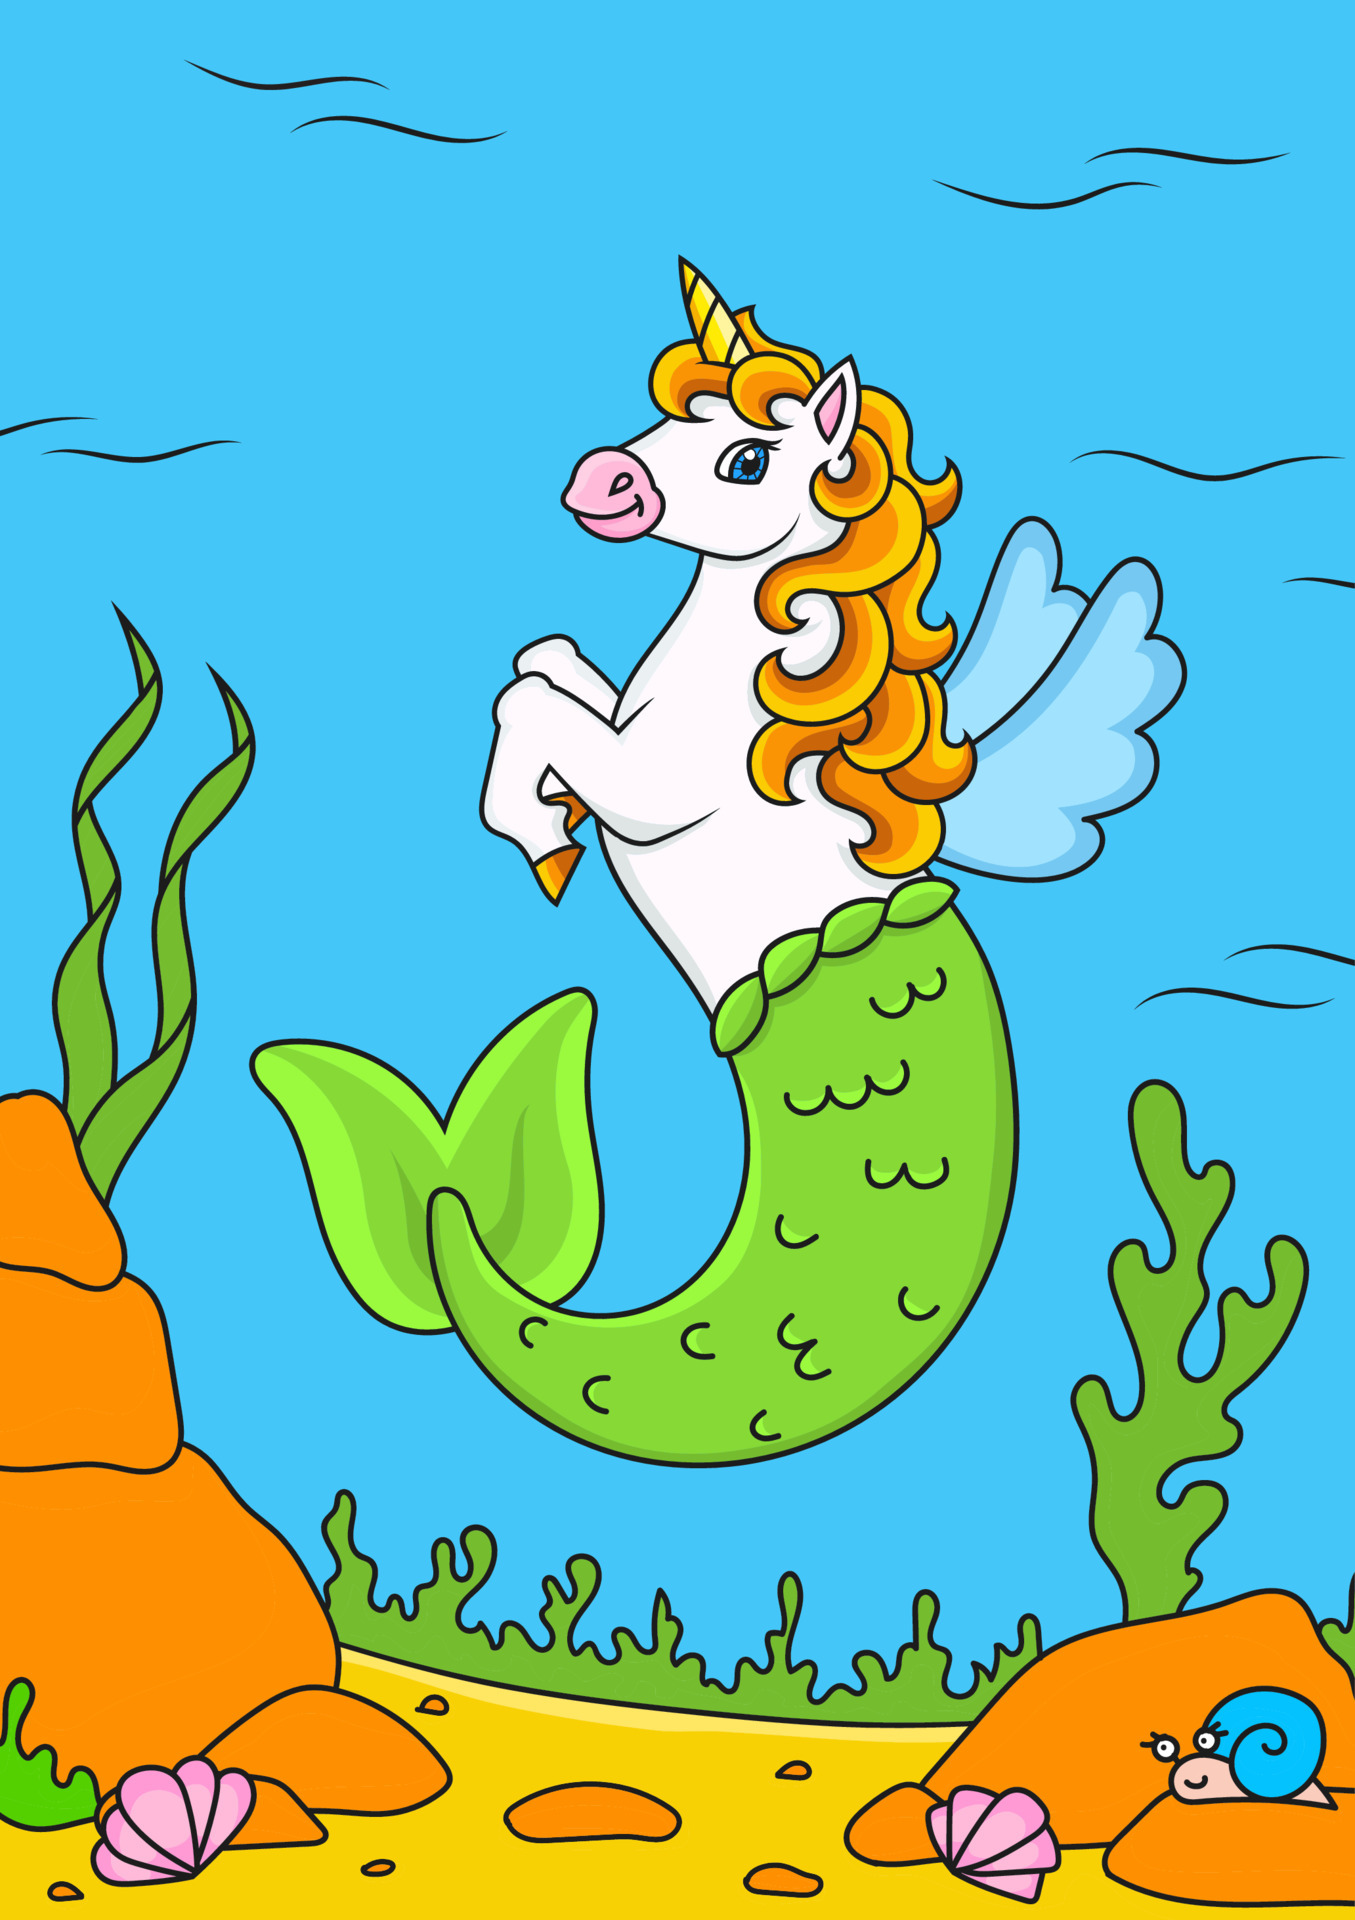 Cute mermaid unicorn. Magic fairy horse. Colored background for your design. For wallpaper, covers, postcards, banners. Vector illustration